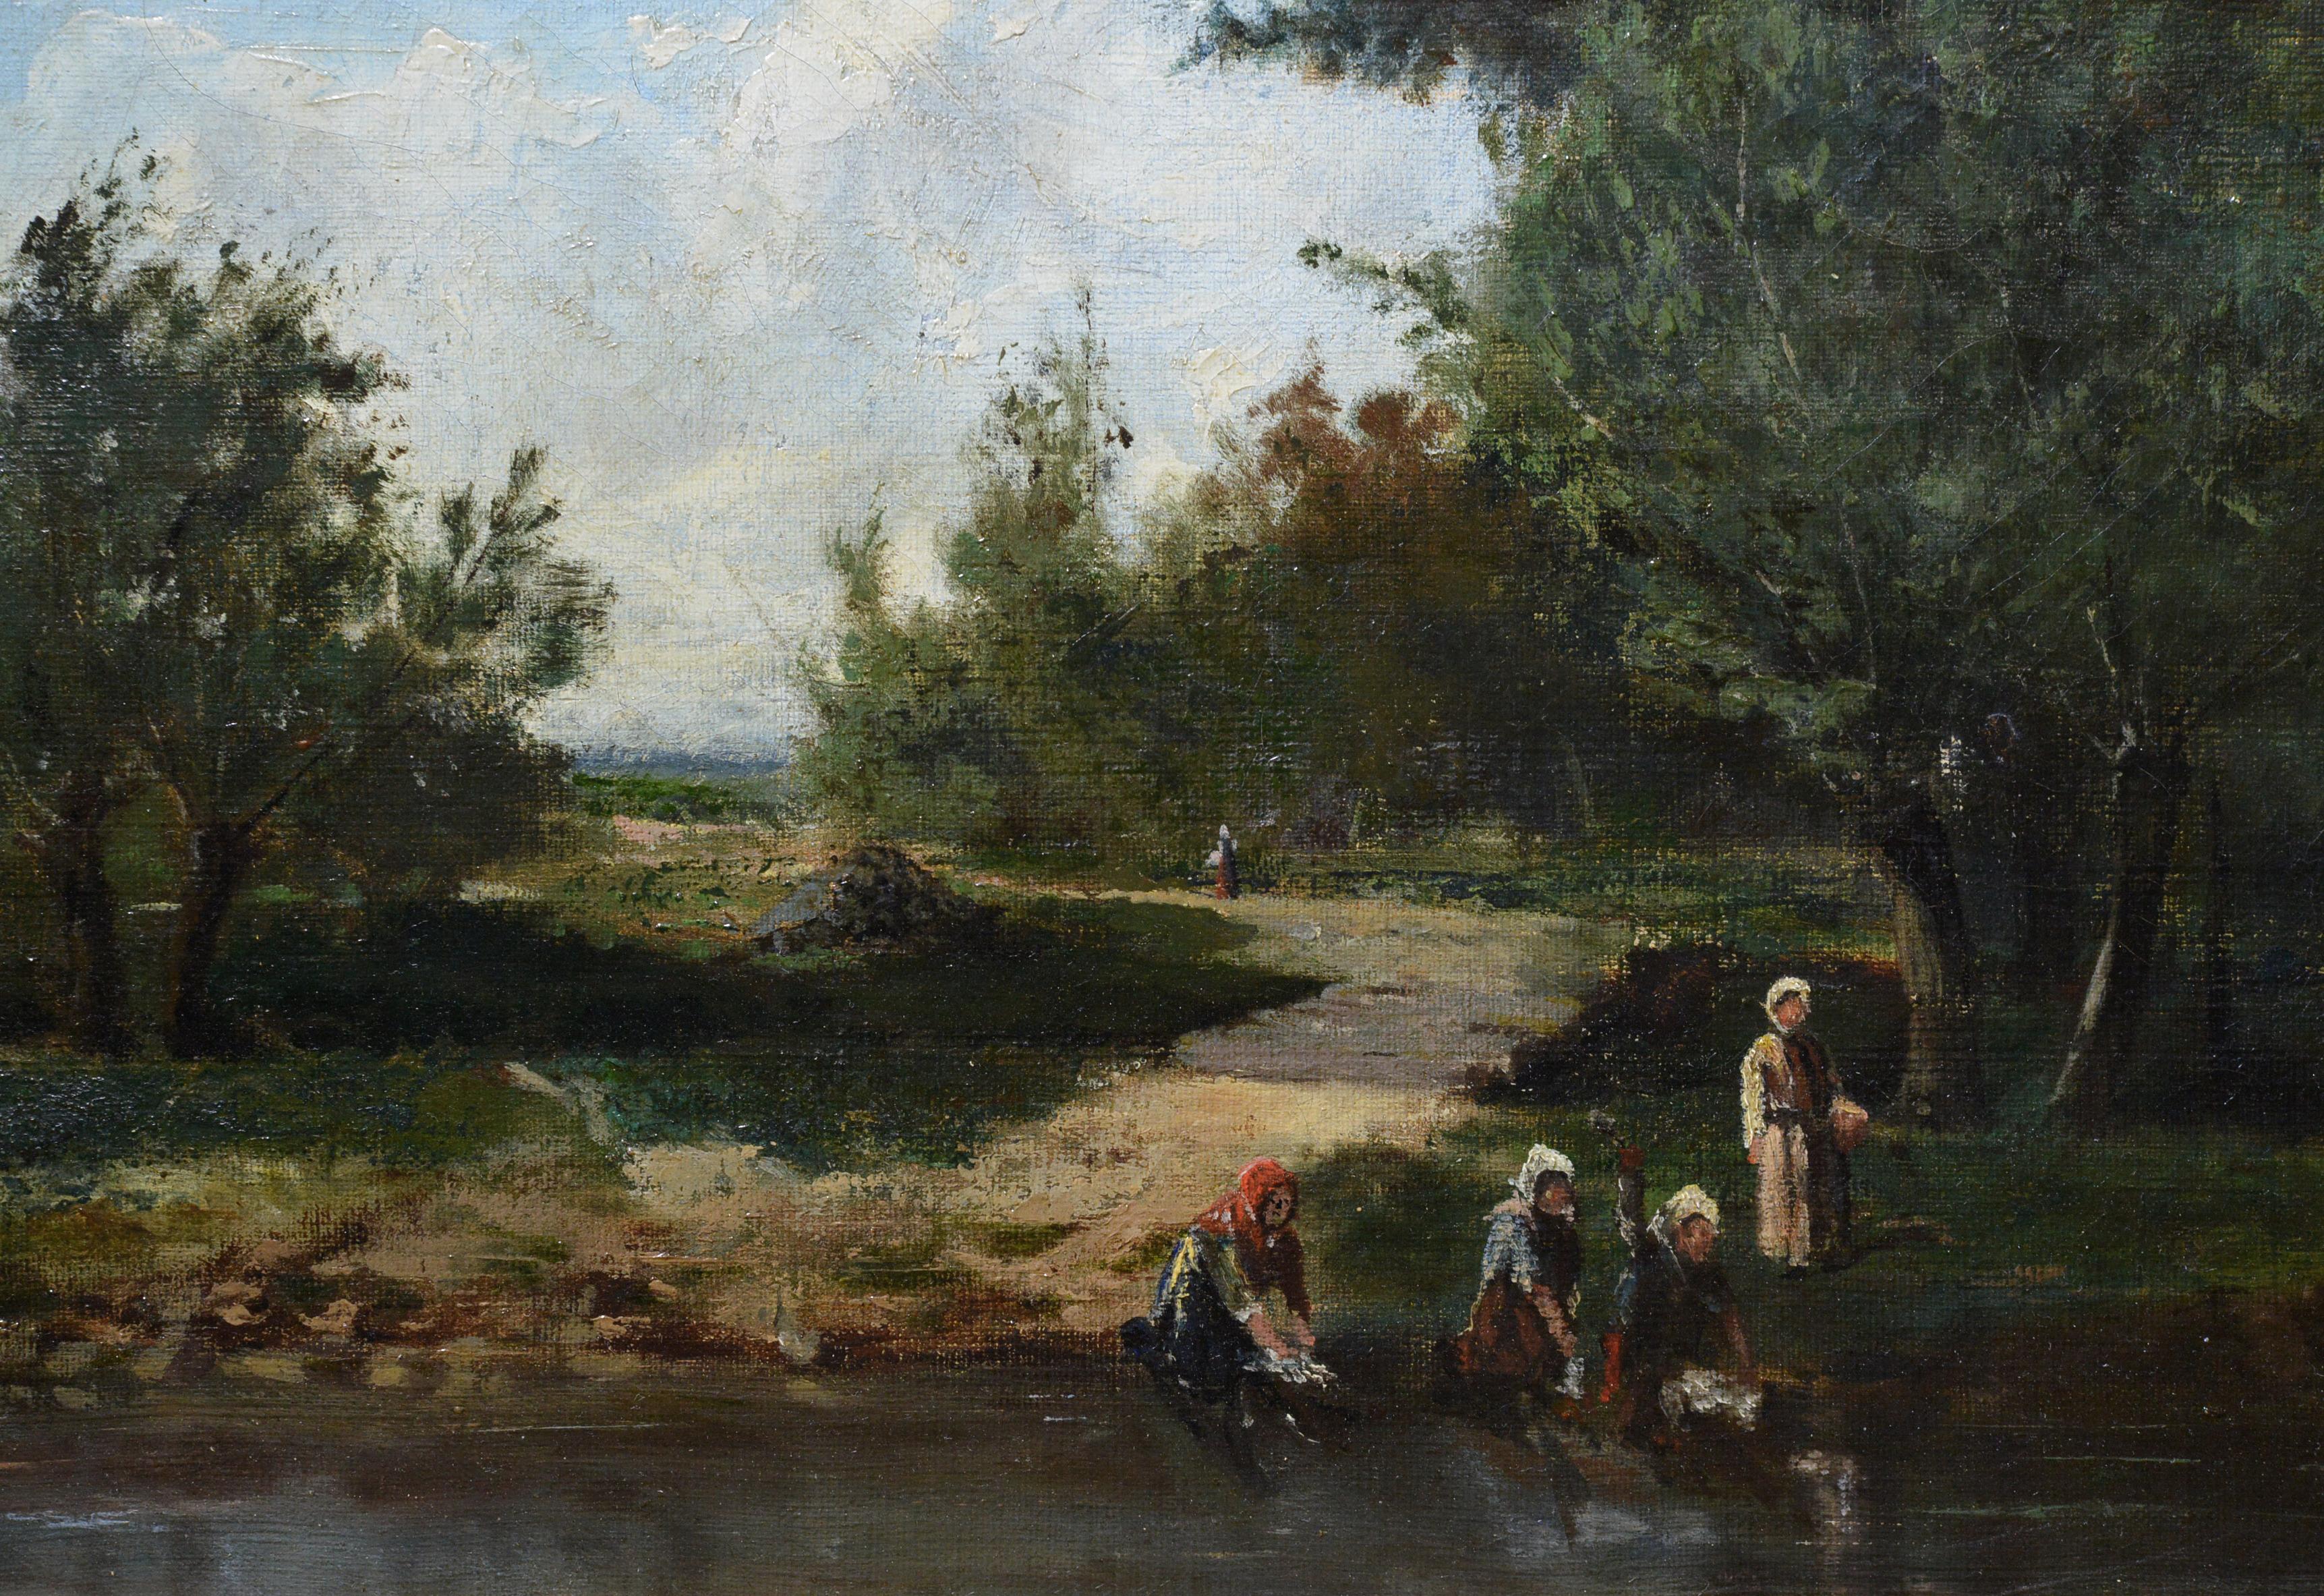 Laundresses on River 19th century Barbizonian Landscape by French Master - Barbizon School Painting by Unknown